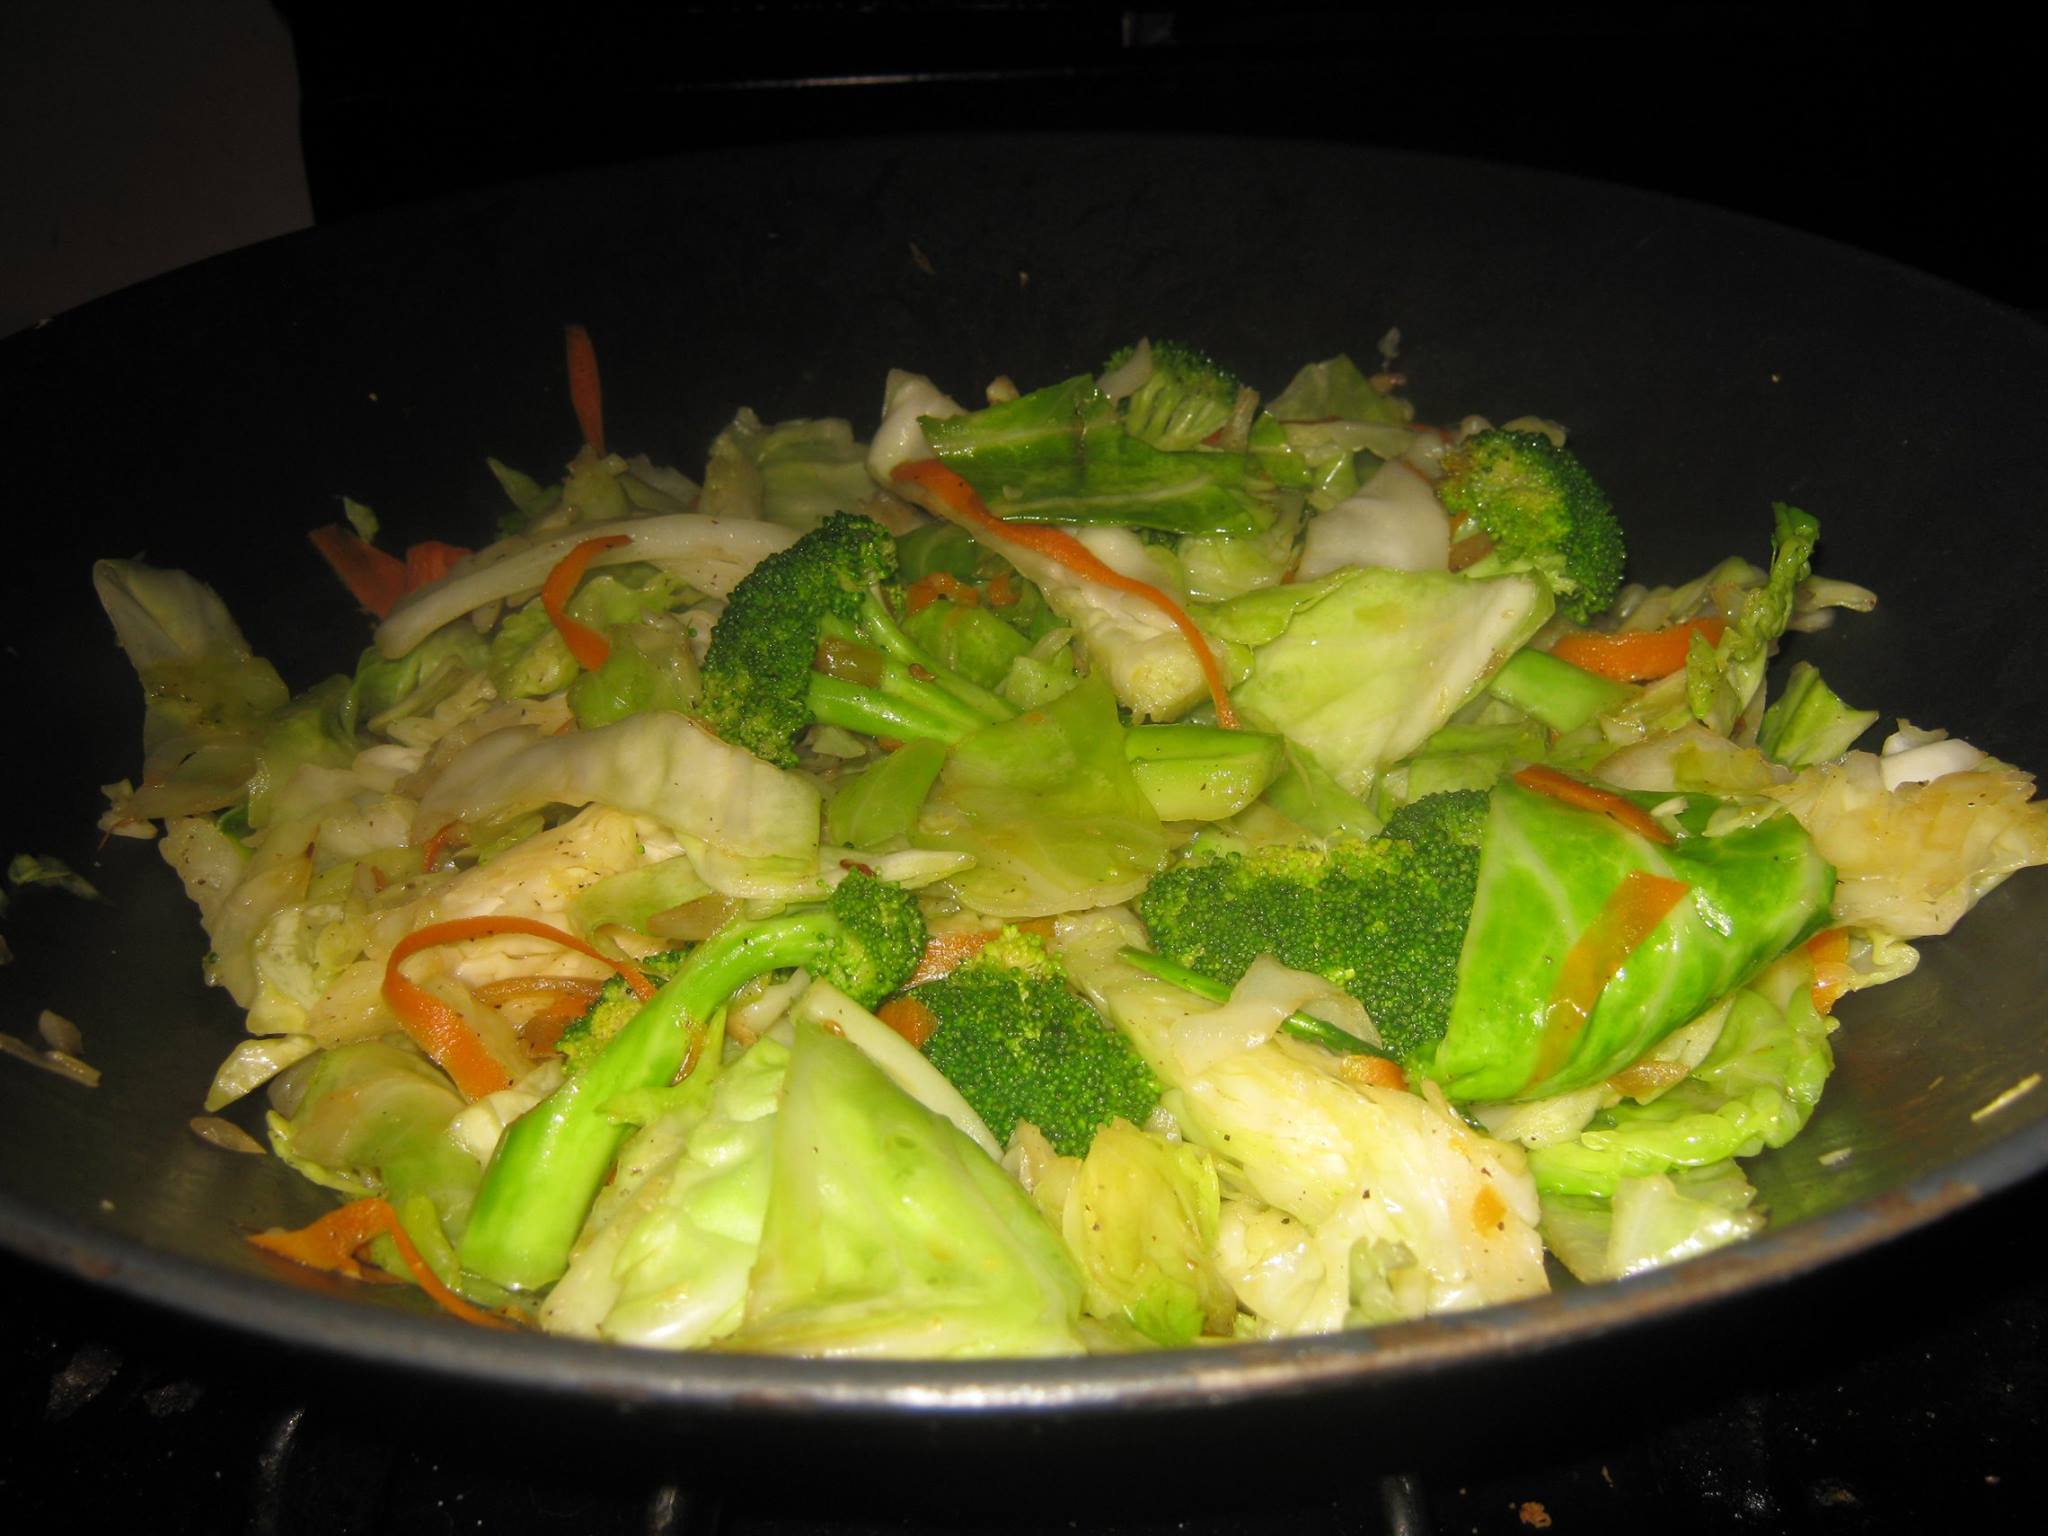 Cooked green cabbage, carrots, broccoli and onions recipe in a wok